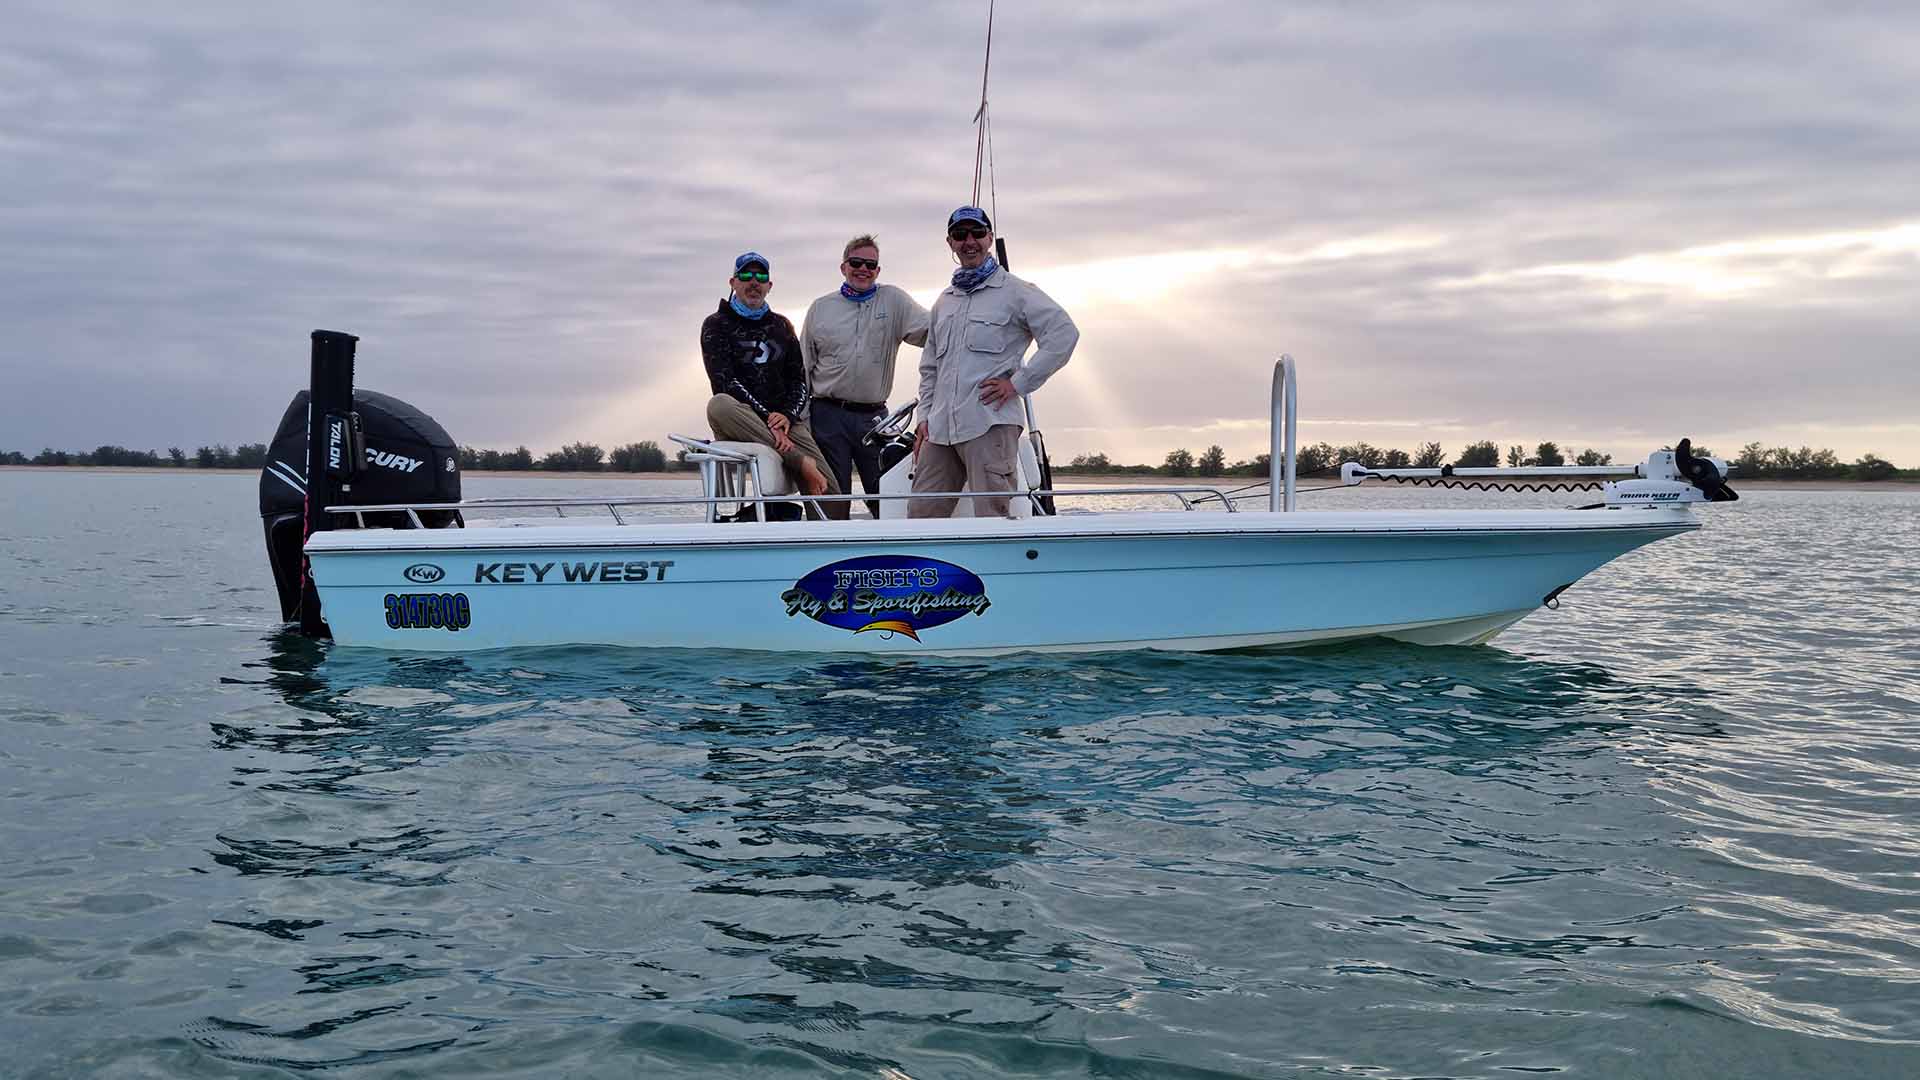 Chasin Tail - Our Vessels - Fish's Fly and Sportfishing Weipa